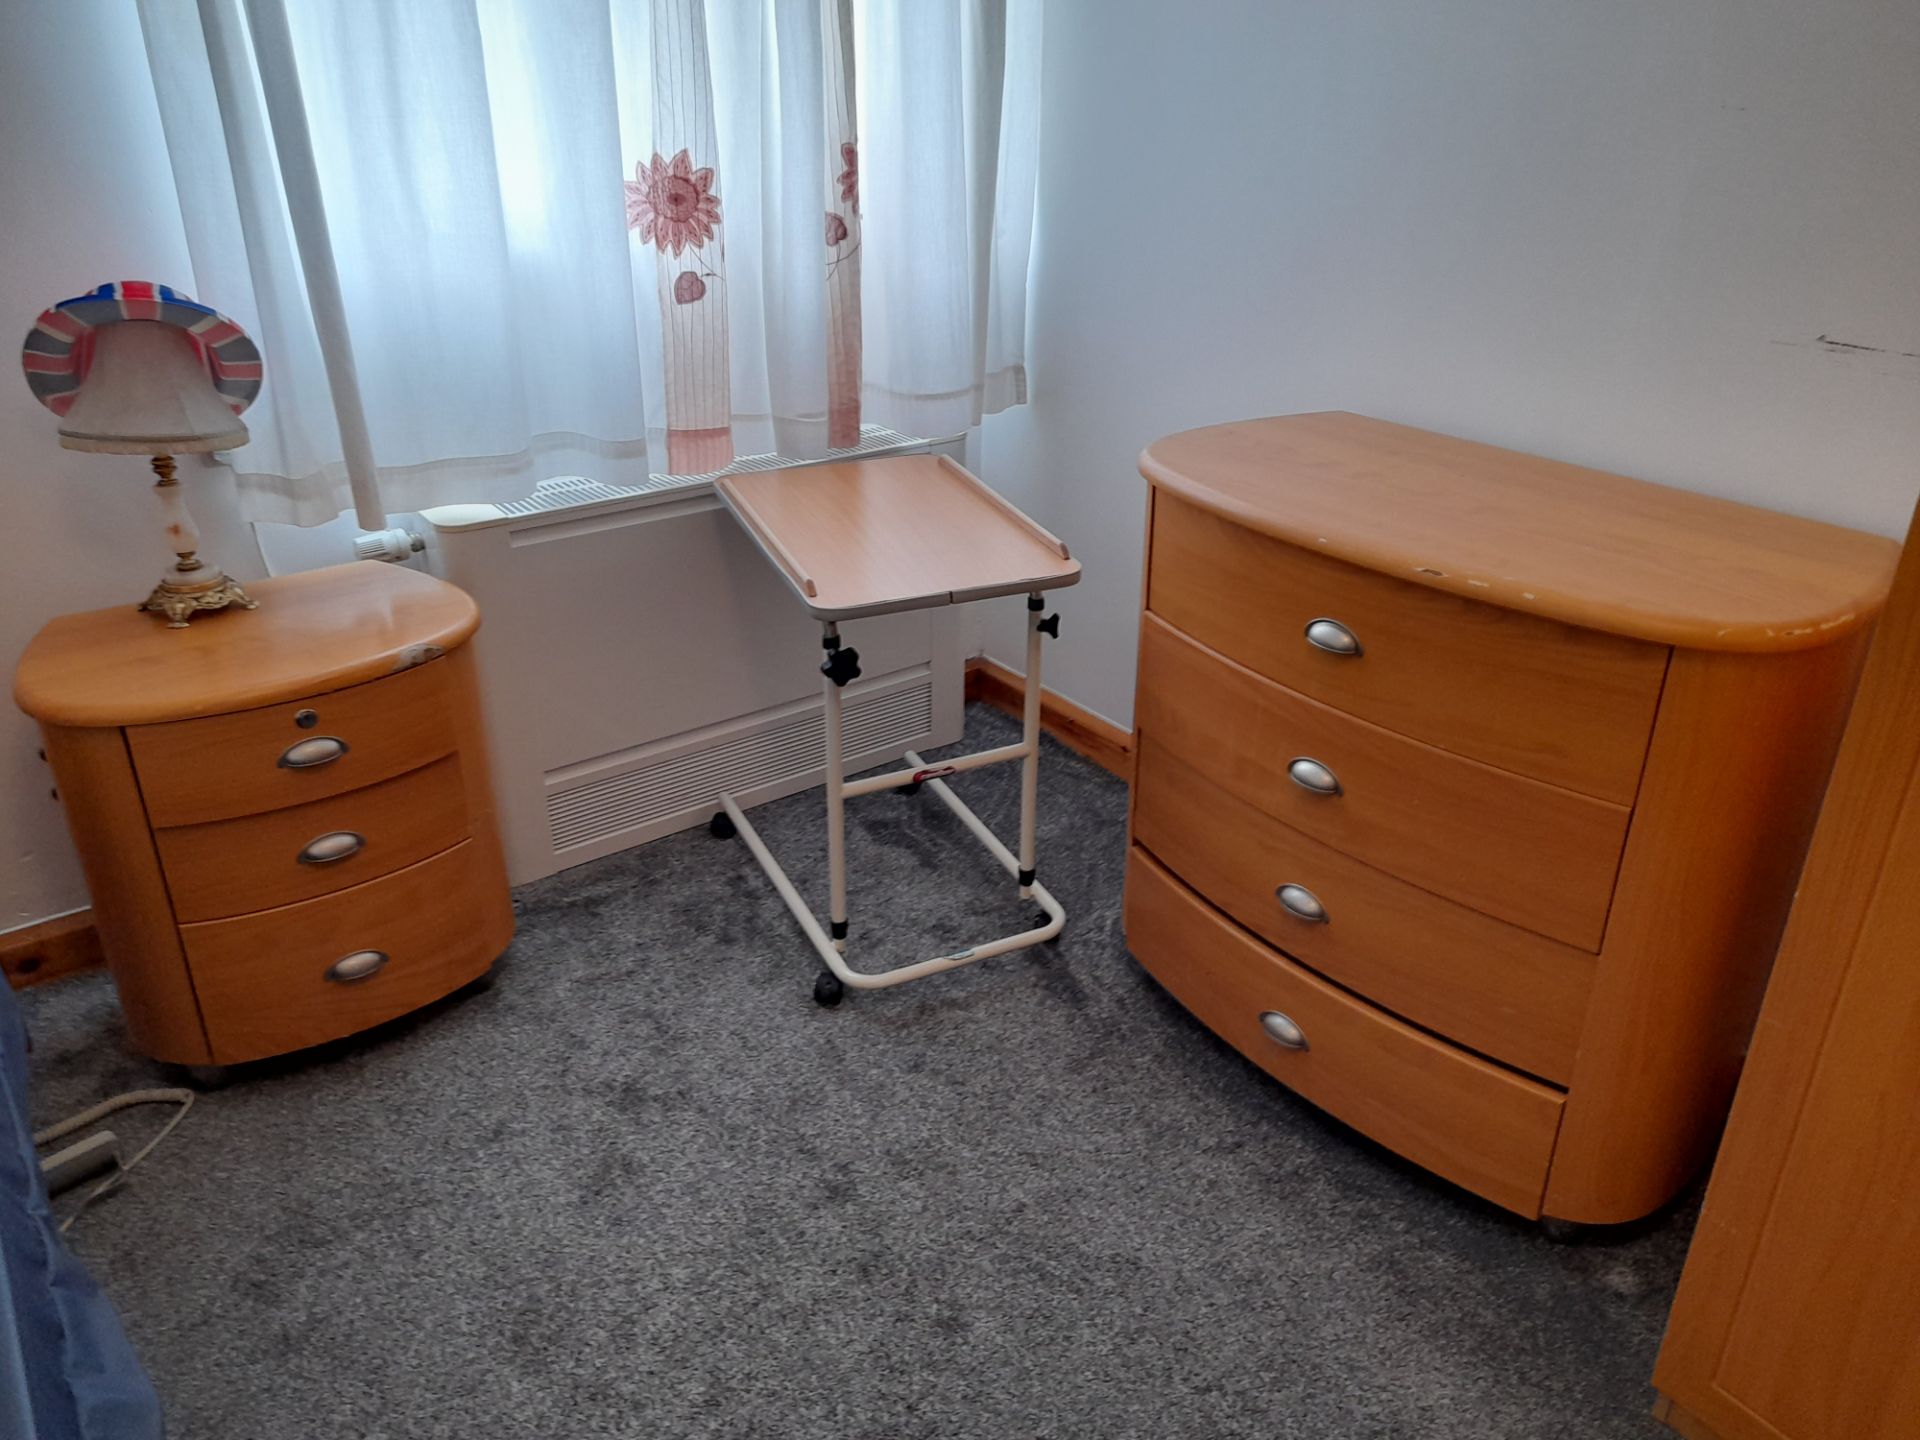 Contents of Bedroom 23 to include; Profile bed with Mattress, Wardrobe, Chest of Drawers, Bedside - Image 2 of 3